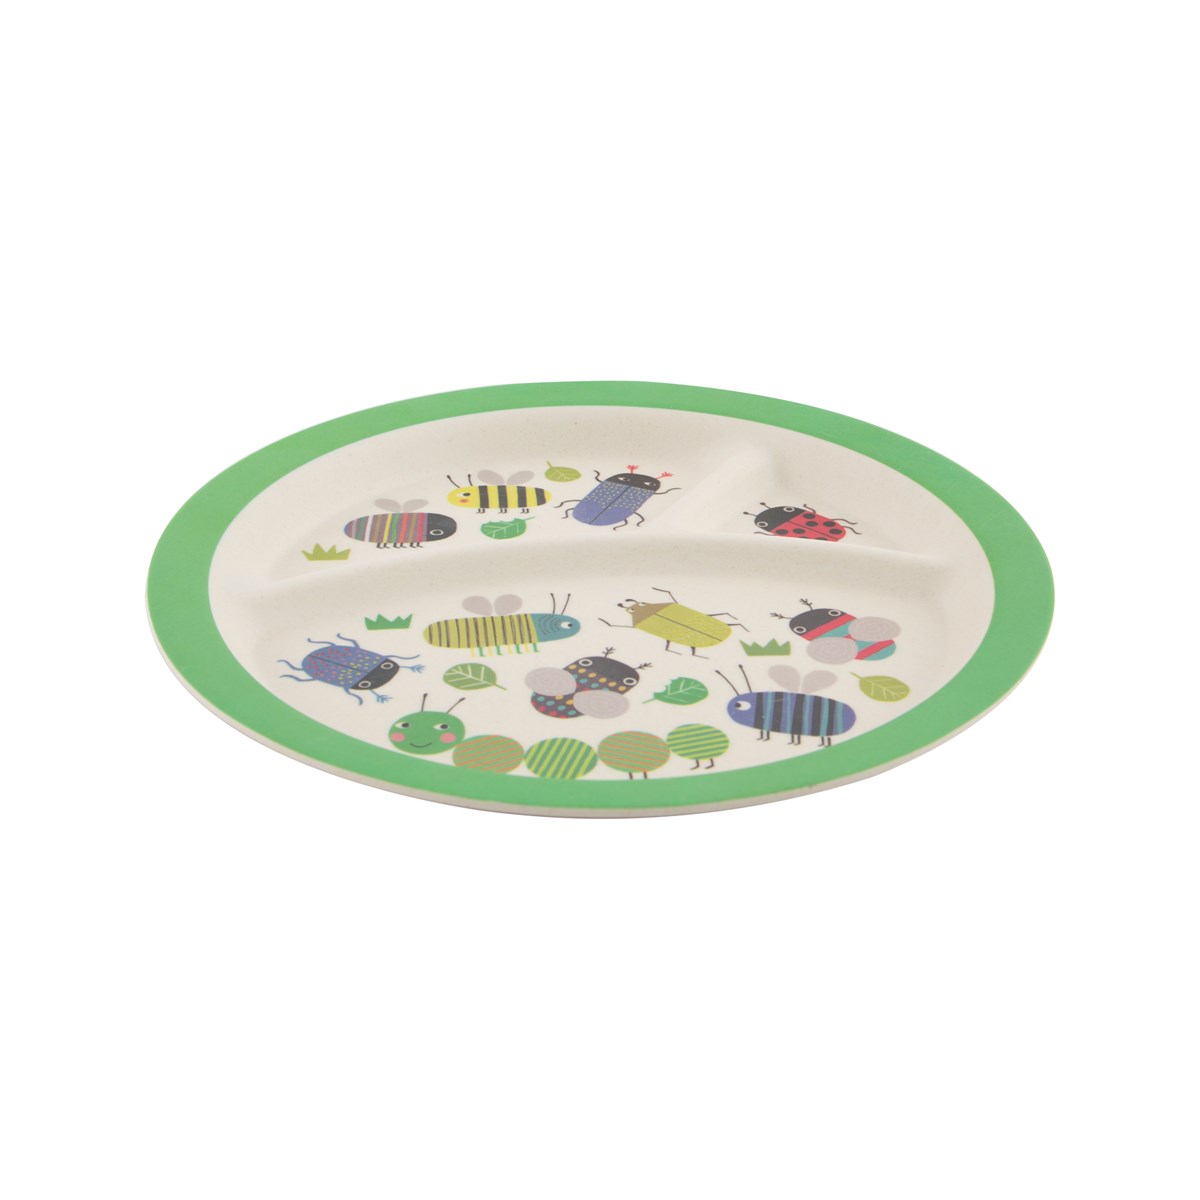 Explore nature with this gorgeous bamboo plate featuring a fun 'busy bugs' design.